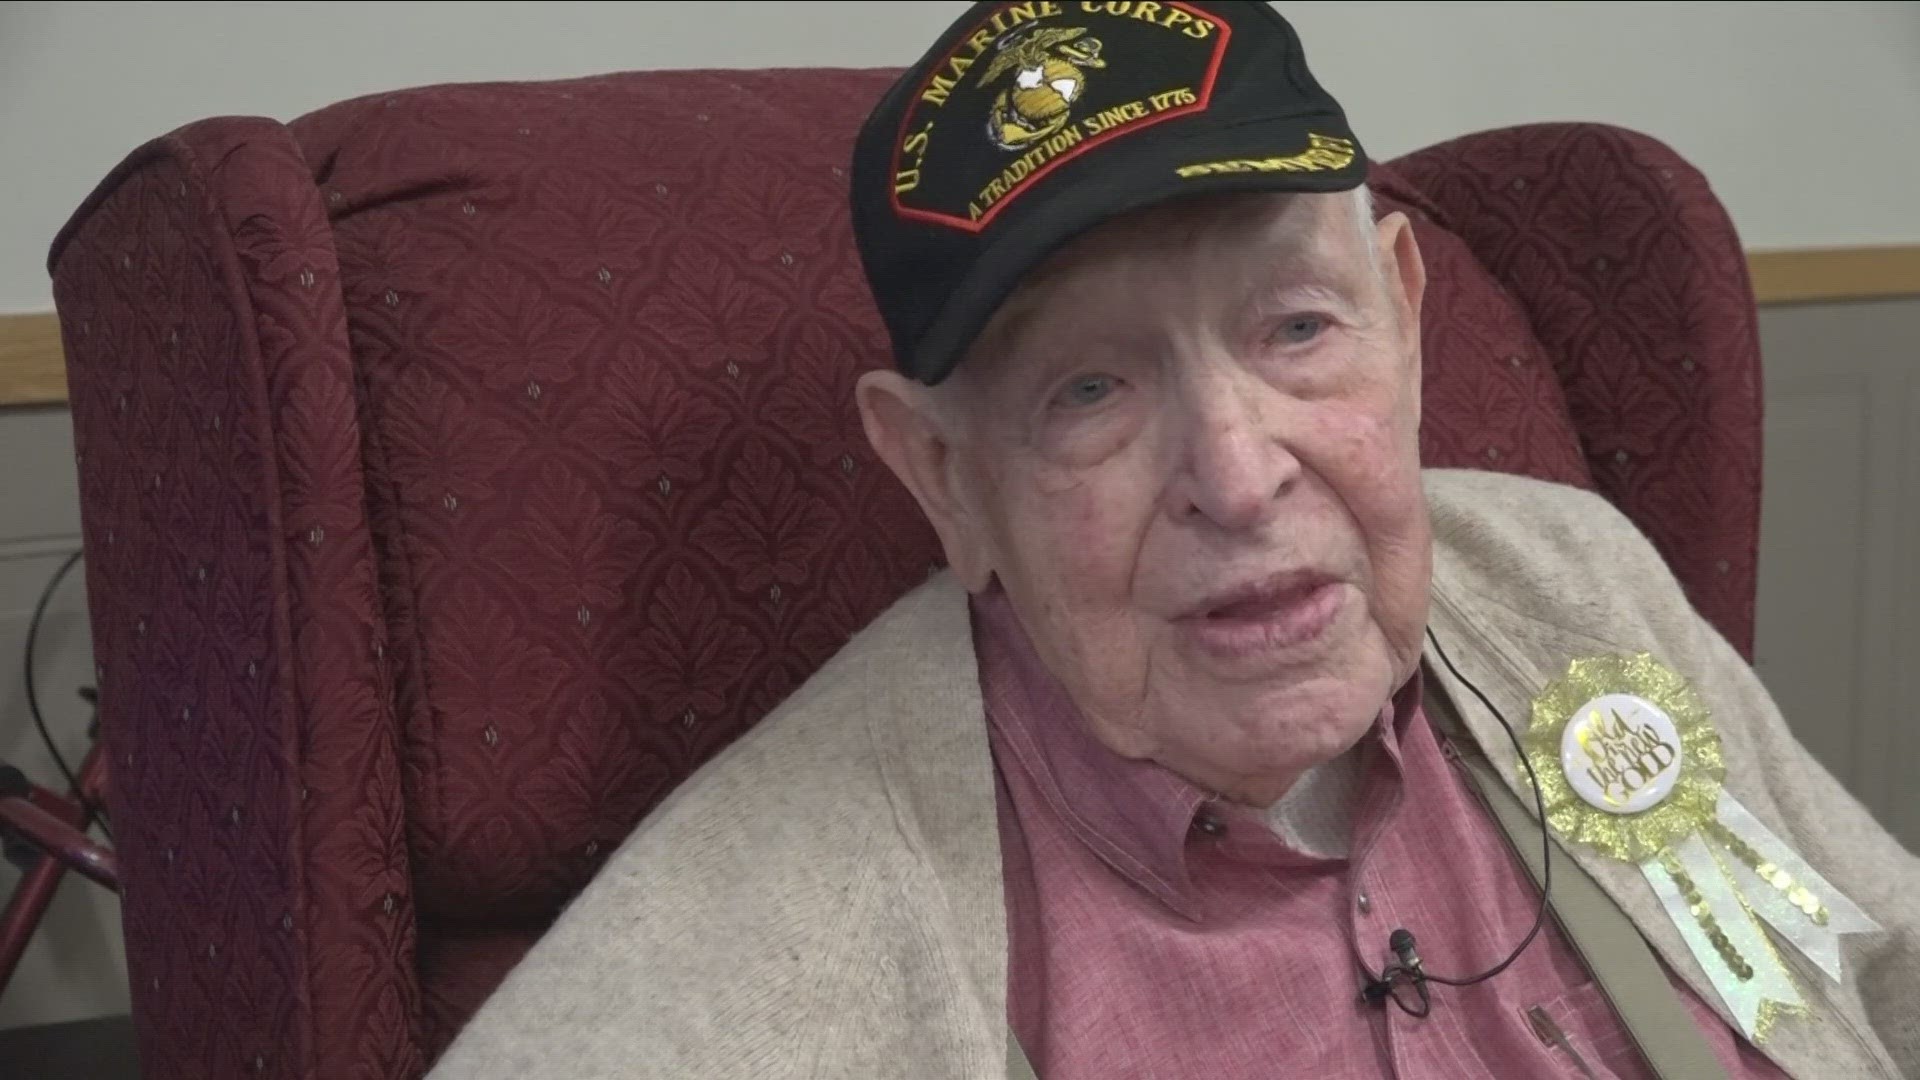 William Gosch, a Marine Corps vet, was presented with eight medals he earned during the war but had never received.